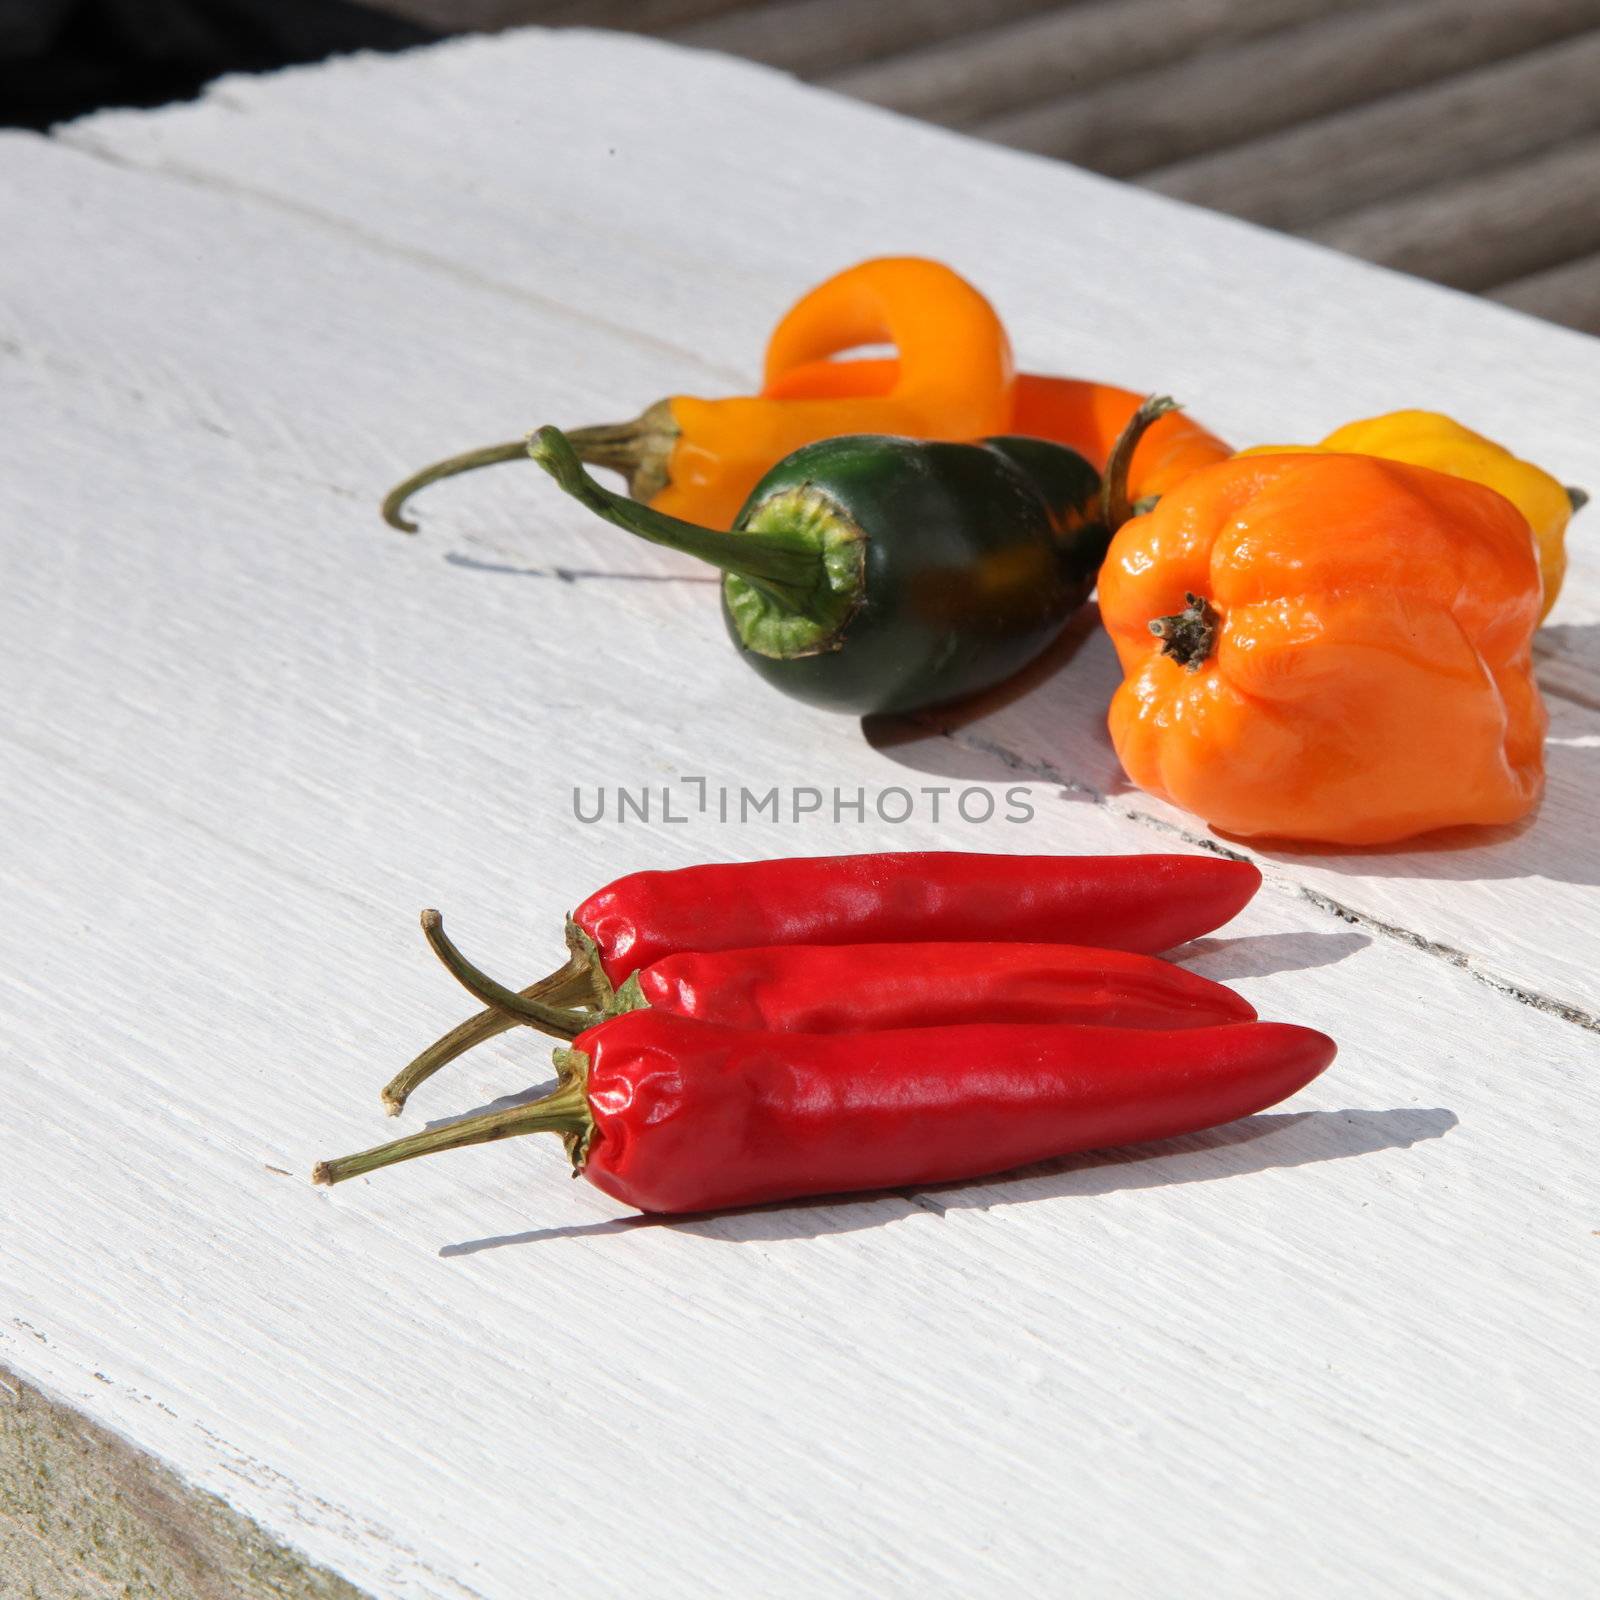 Three whole fresh red hot chilli peppers in the foreground on a painted white wooden surface with colourful sweet bell peppers behind